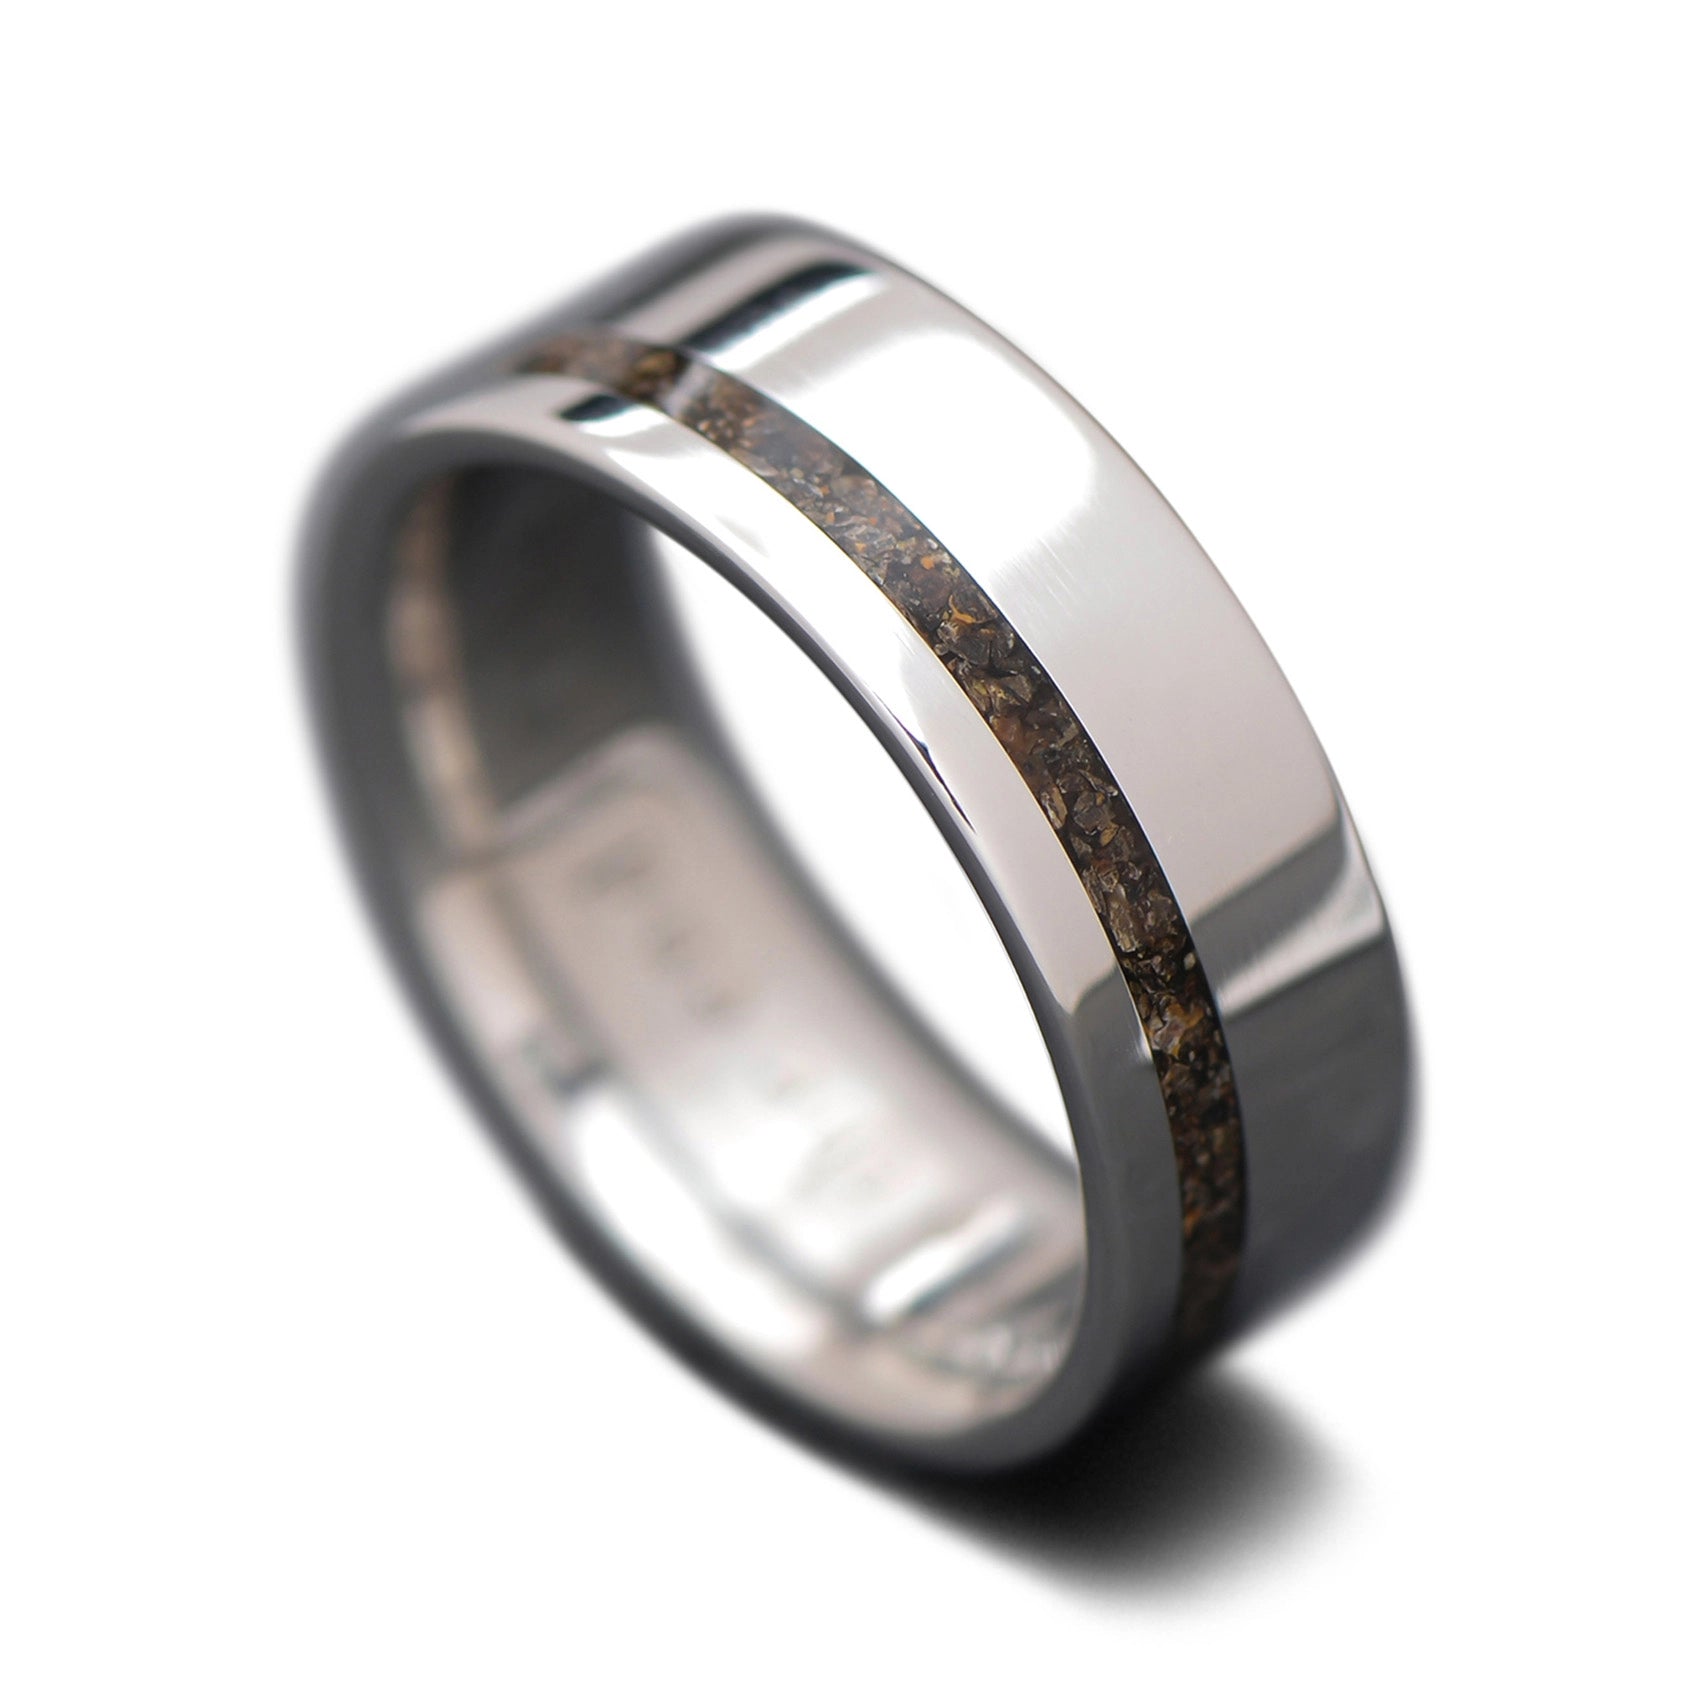 Titanium Core Ring with  Crushed T-Rex inlay, 8mm -THE SHIFT